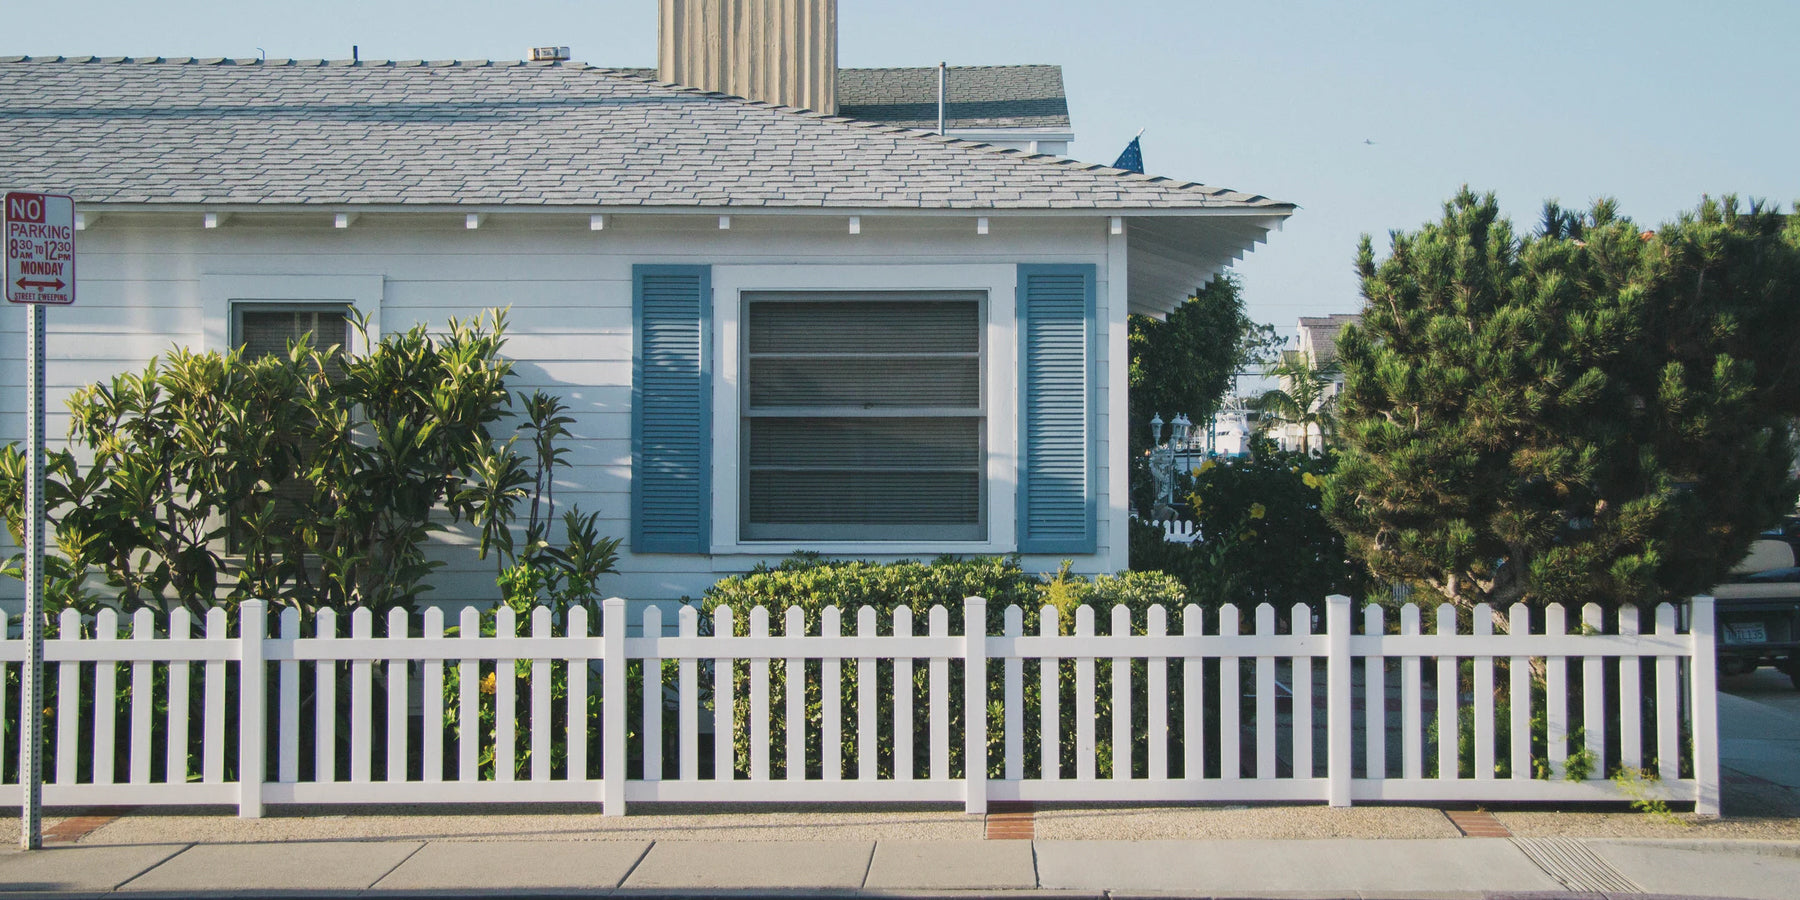 Street curbside corner featuring a white house with a open blue shutters and a white fence.